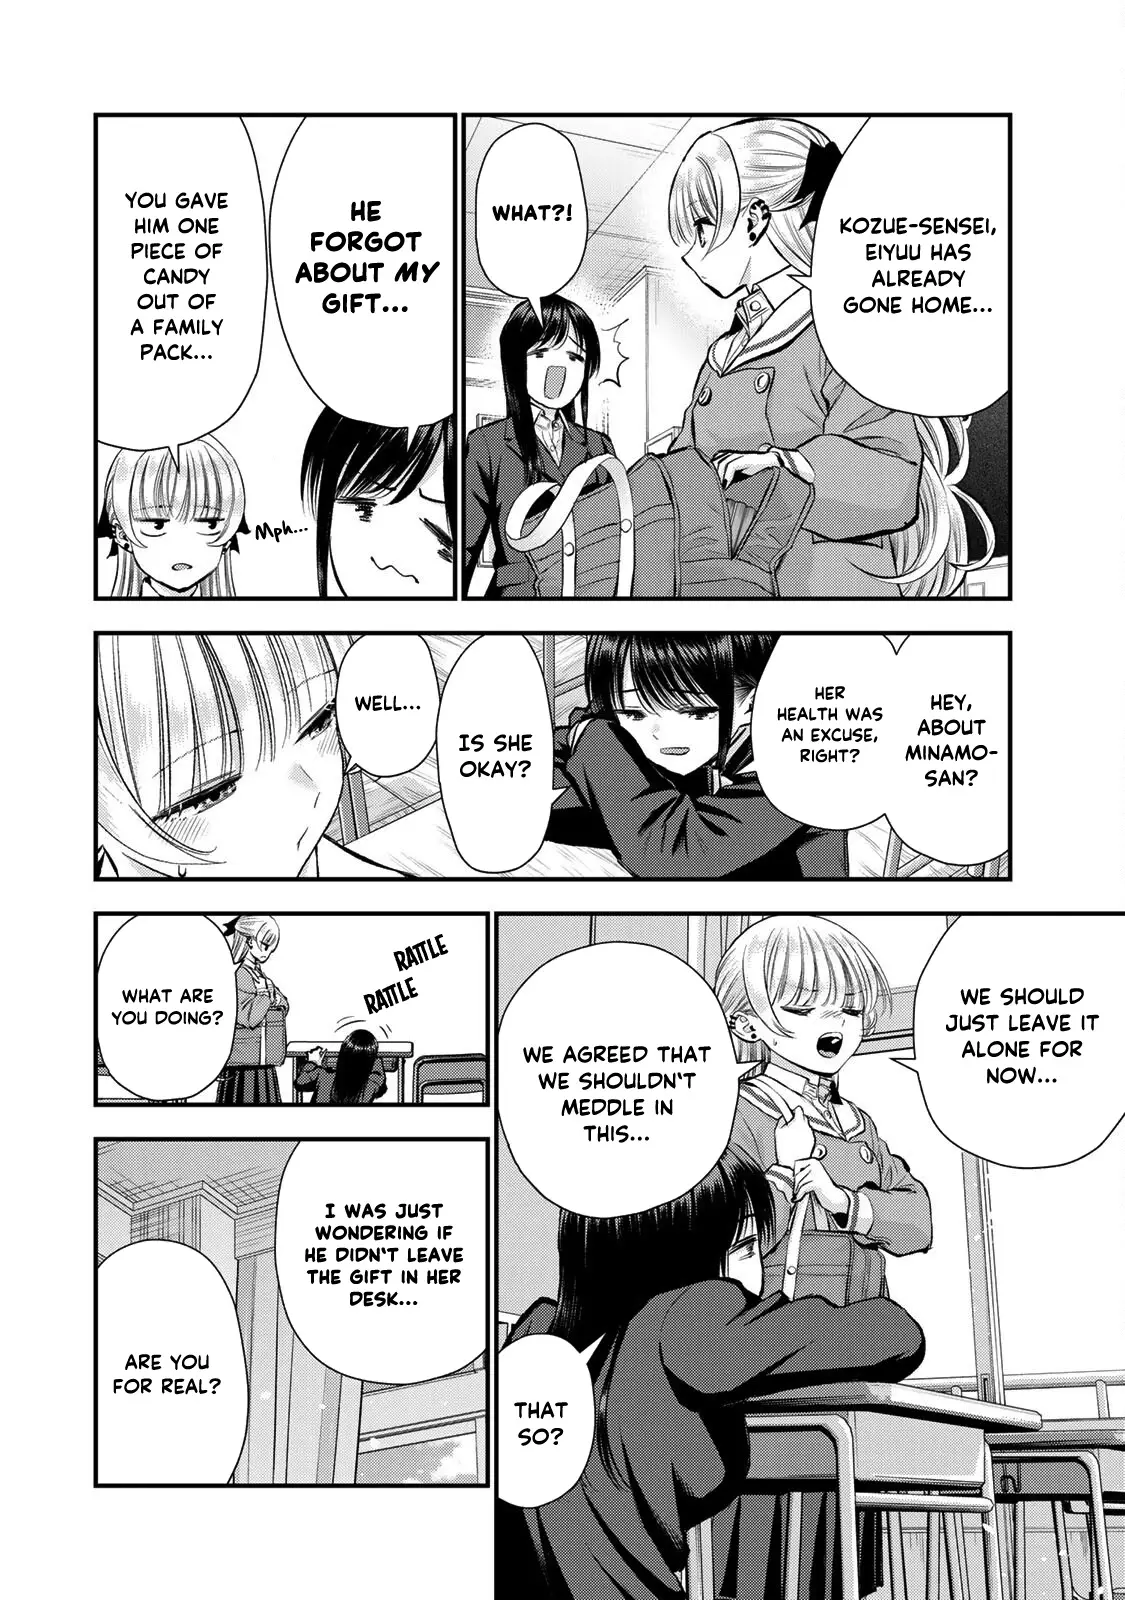 No More Love With The Girls - 70 page 4-9b03b020